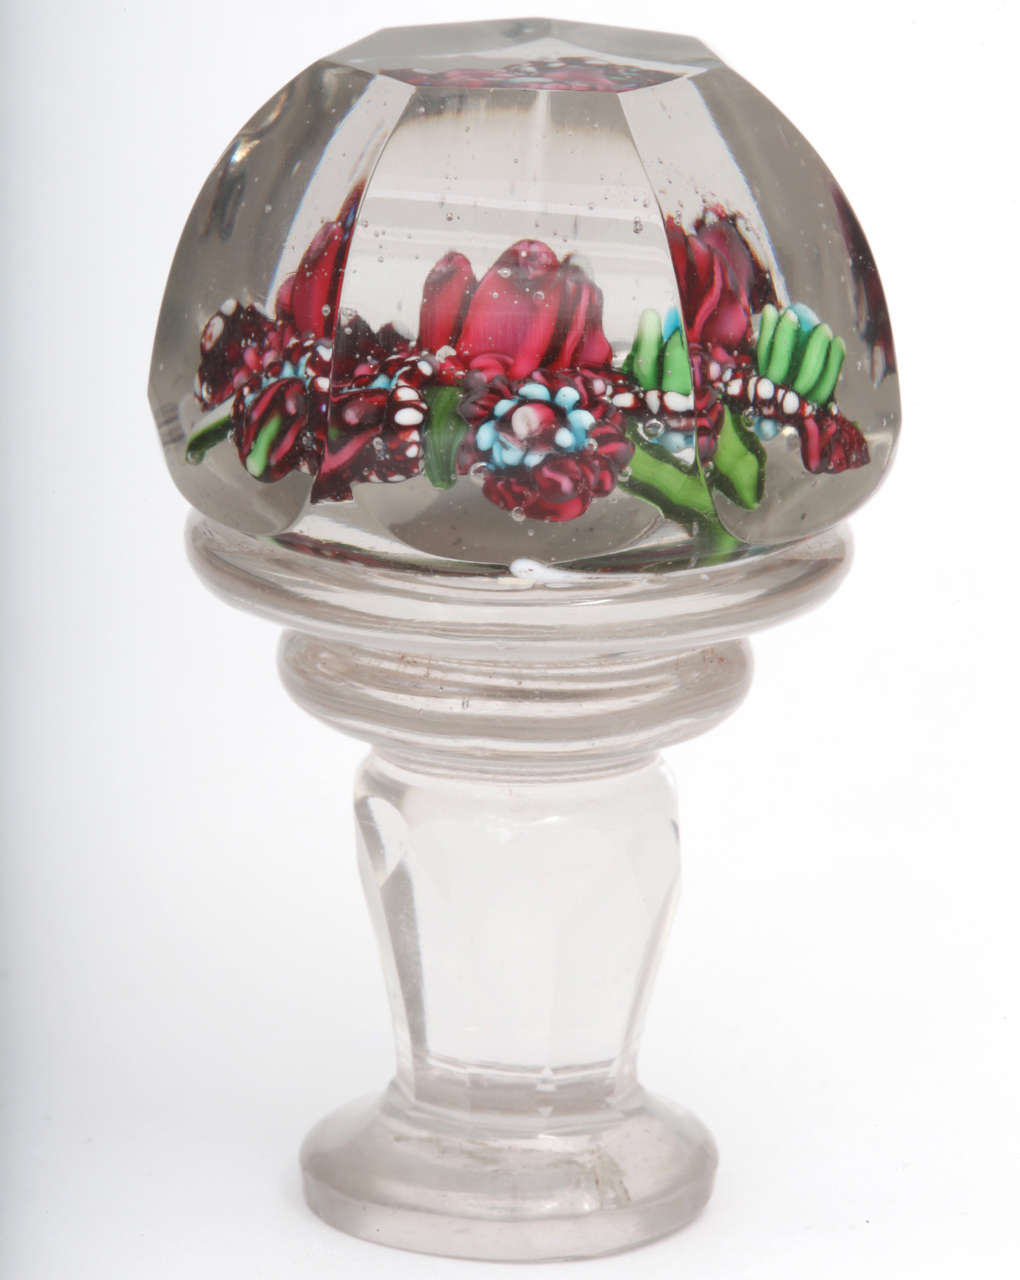 A rare Russian glass paperweight seal with a central red flower surrounded by five smaller flowers on top and clear glass lower section